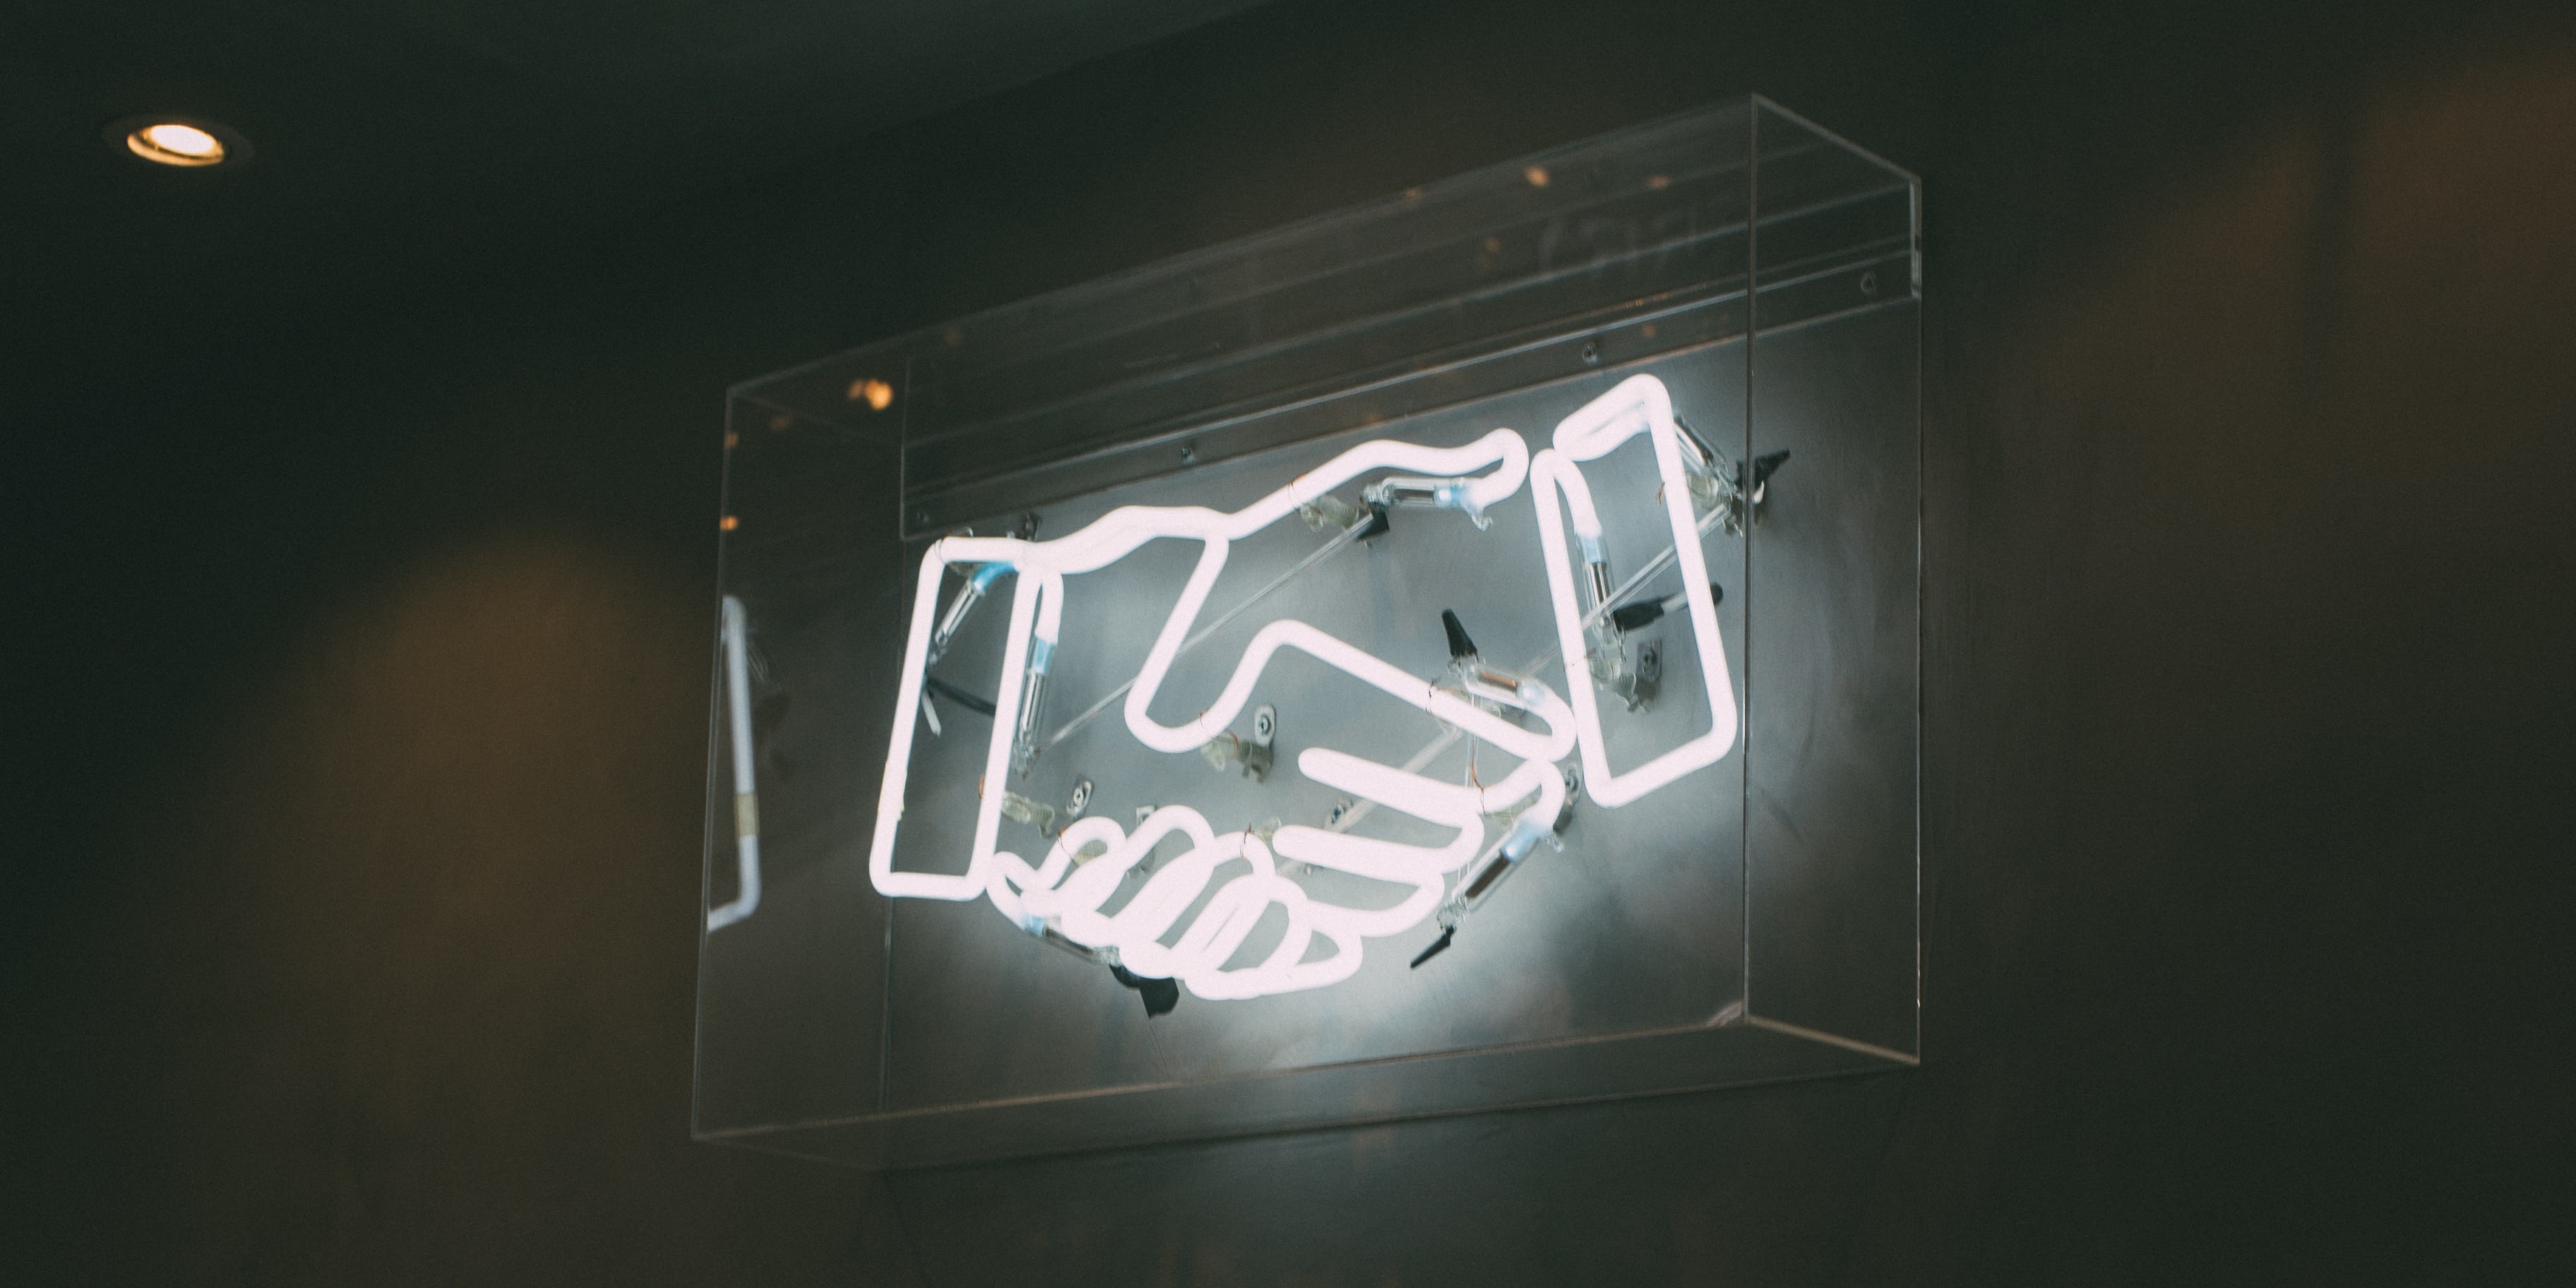 Handshake. Wrap up your deal with potential customers. Photo by @charlesdeluvio via Unsplash